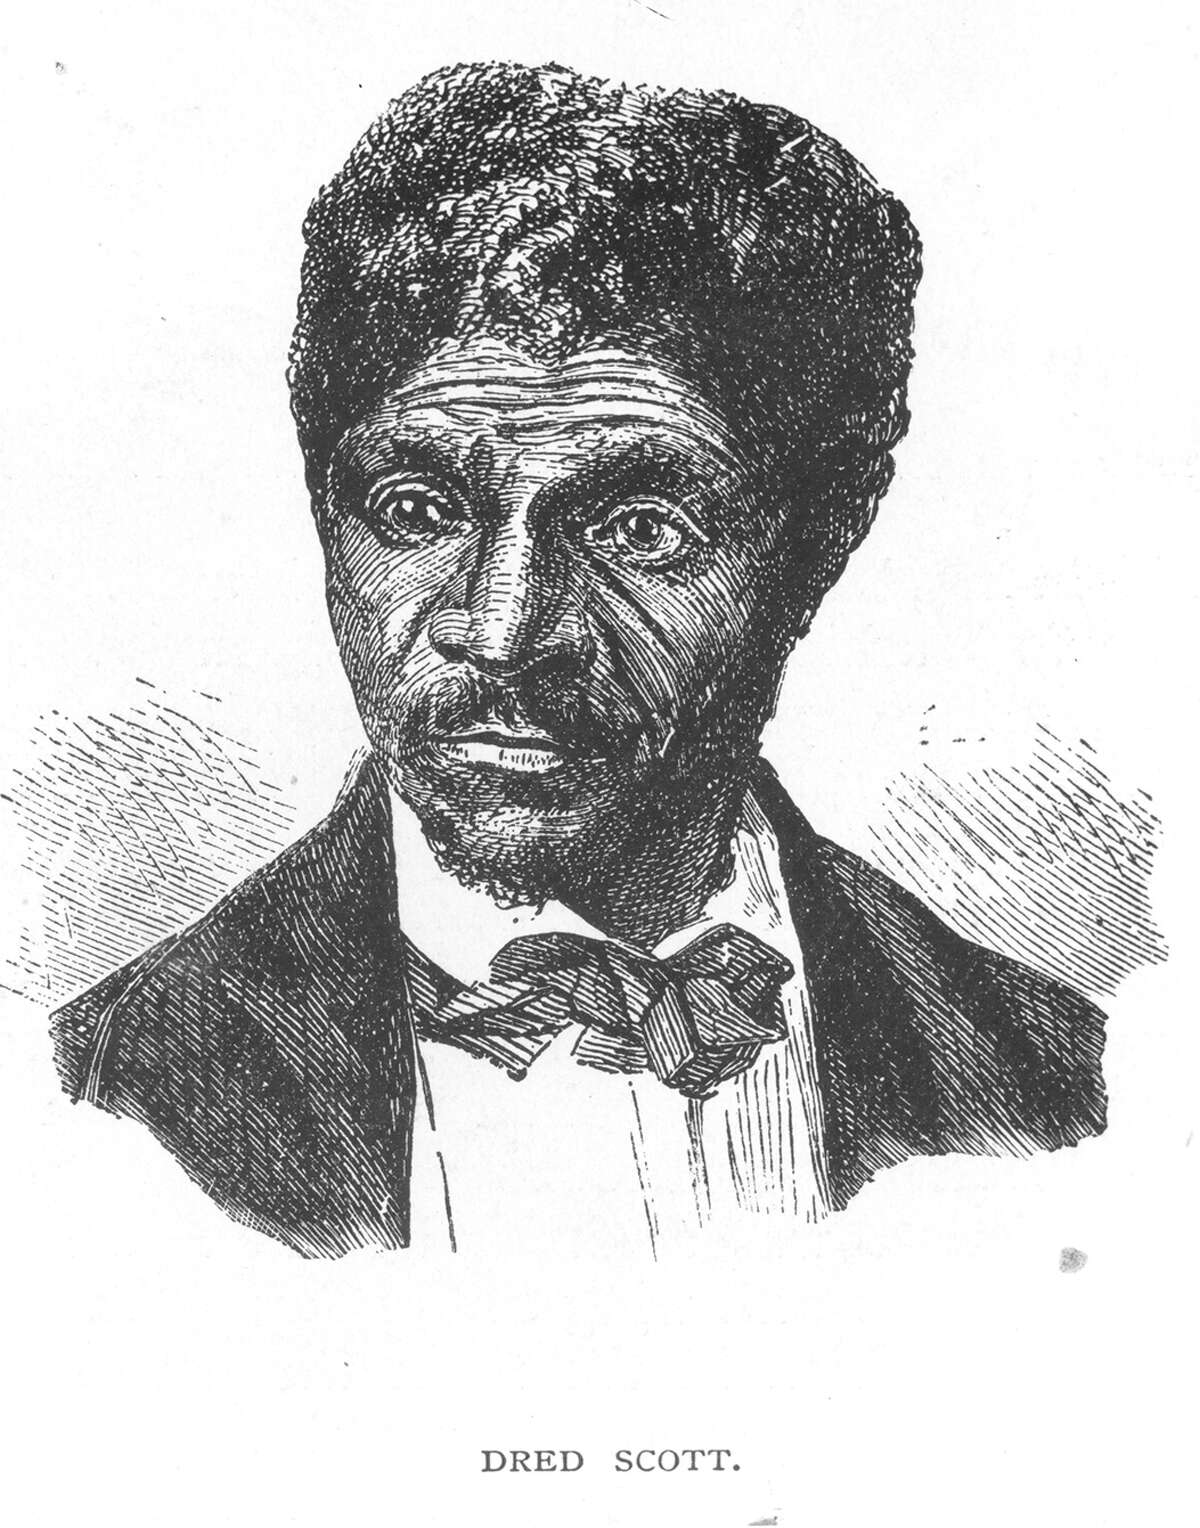 Dred Scott. Wood engraving from Frank Leslie's Illustrated Weekly, 27 June 1857.